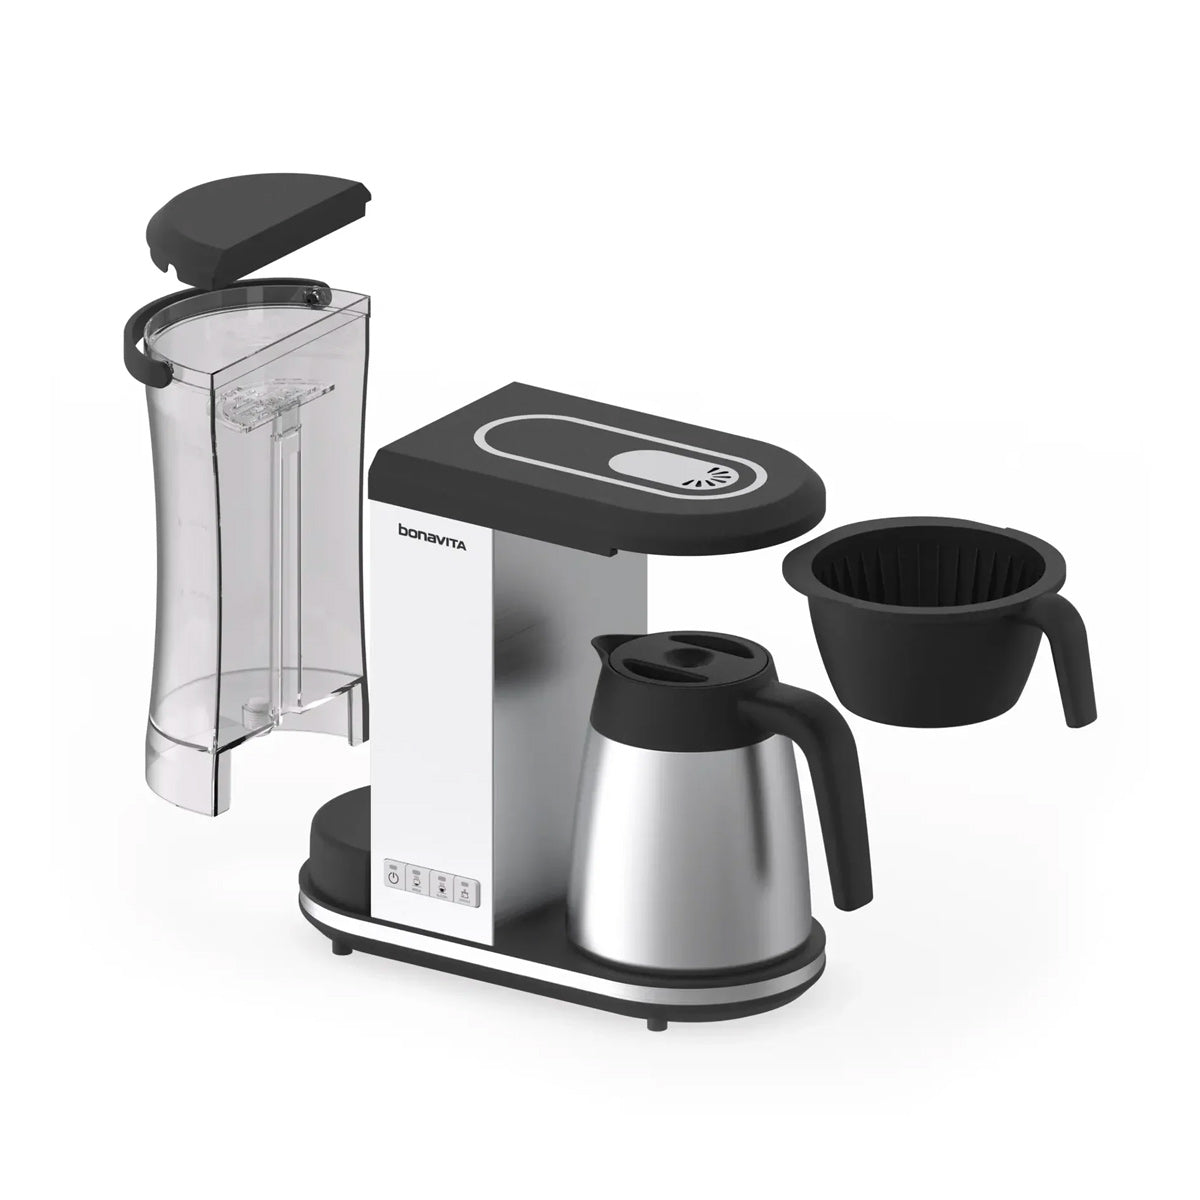 Bonavita BV1500TS 5-Cup Stainless Steel Lined Carafe Coffee Brewer